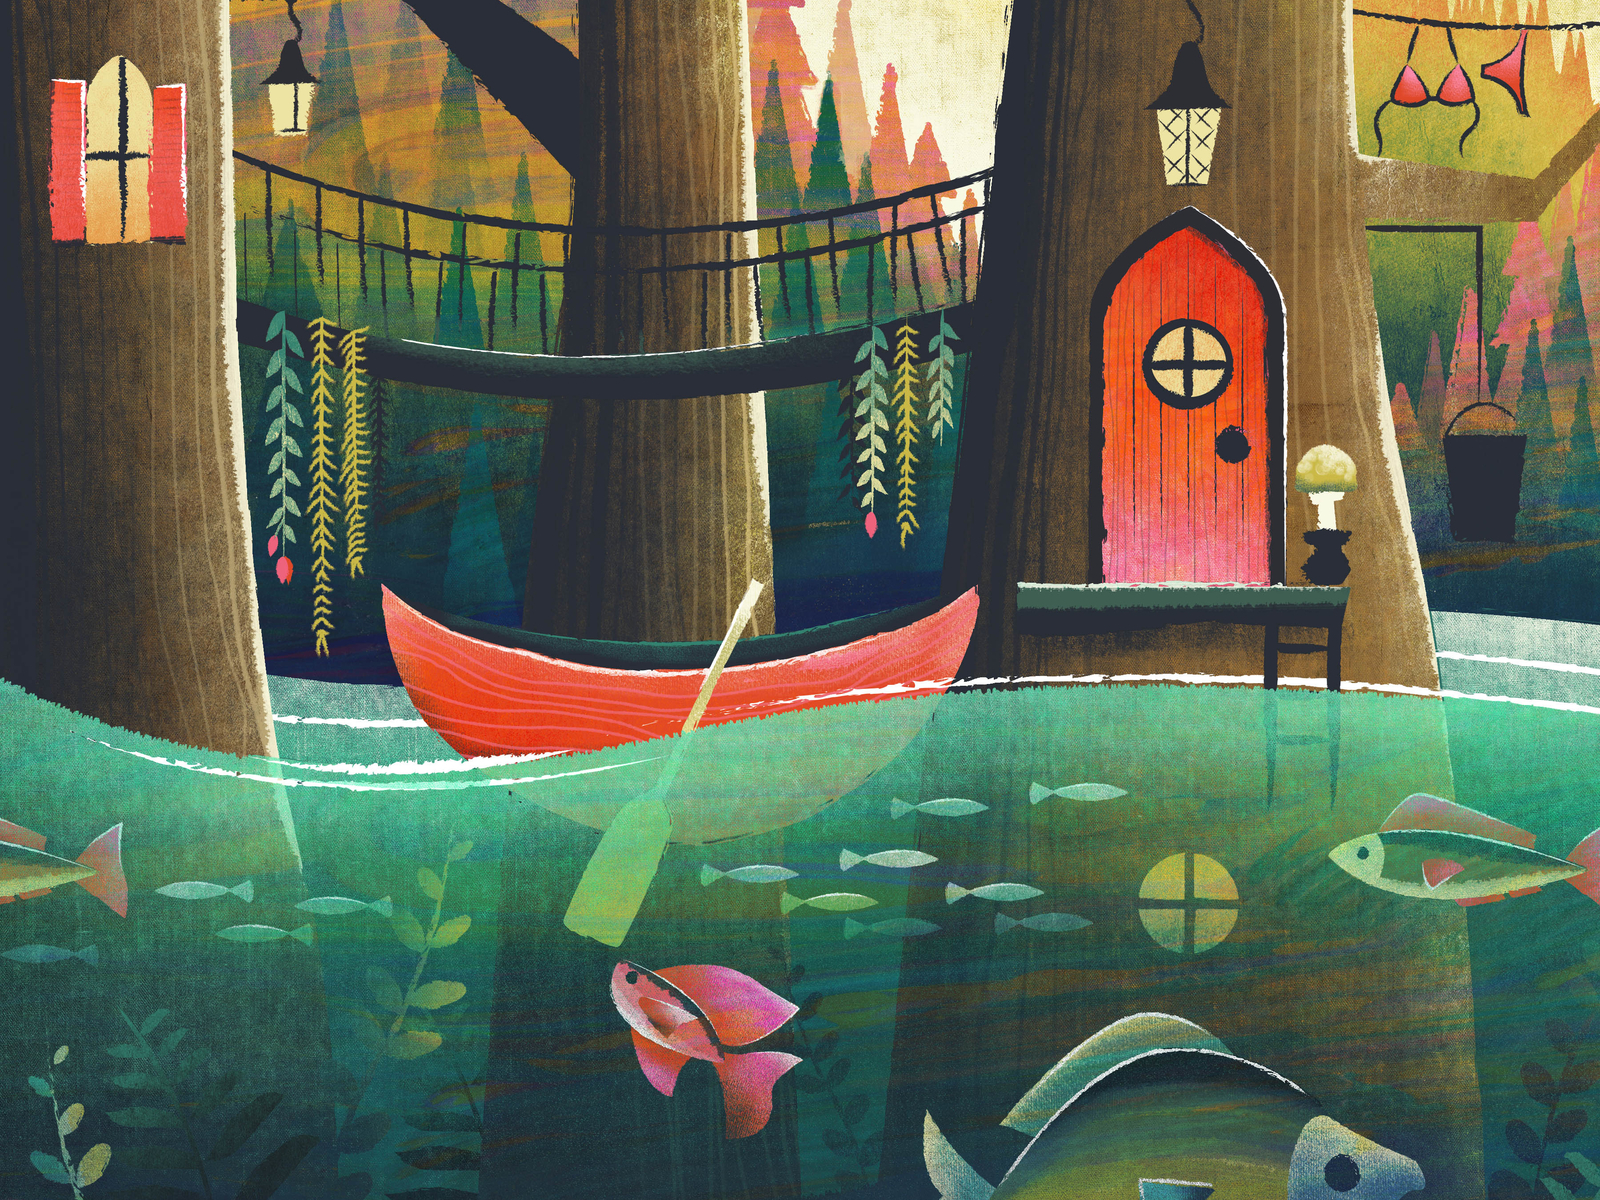 Just an illustration of my house mysterious fairytale pond fish canoe forest swamp illustration